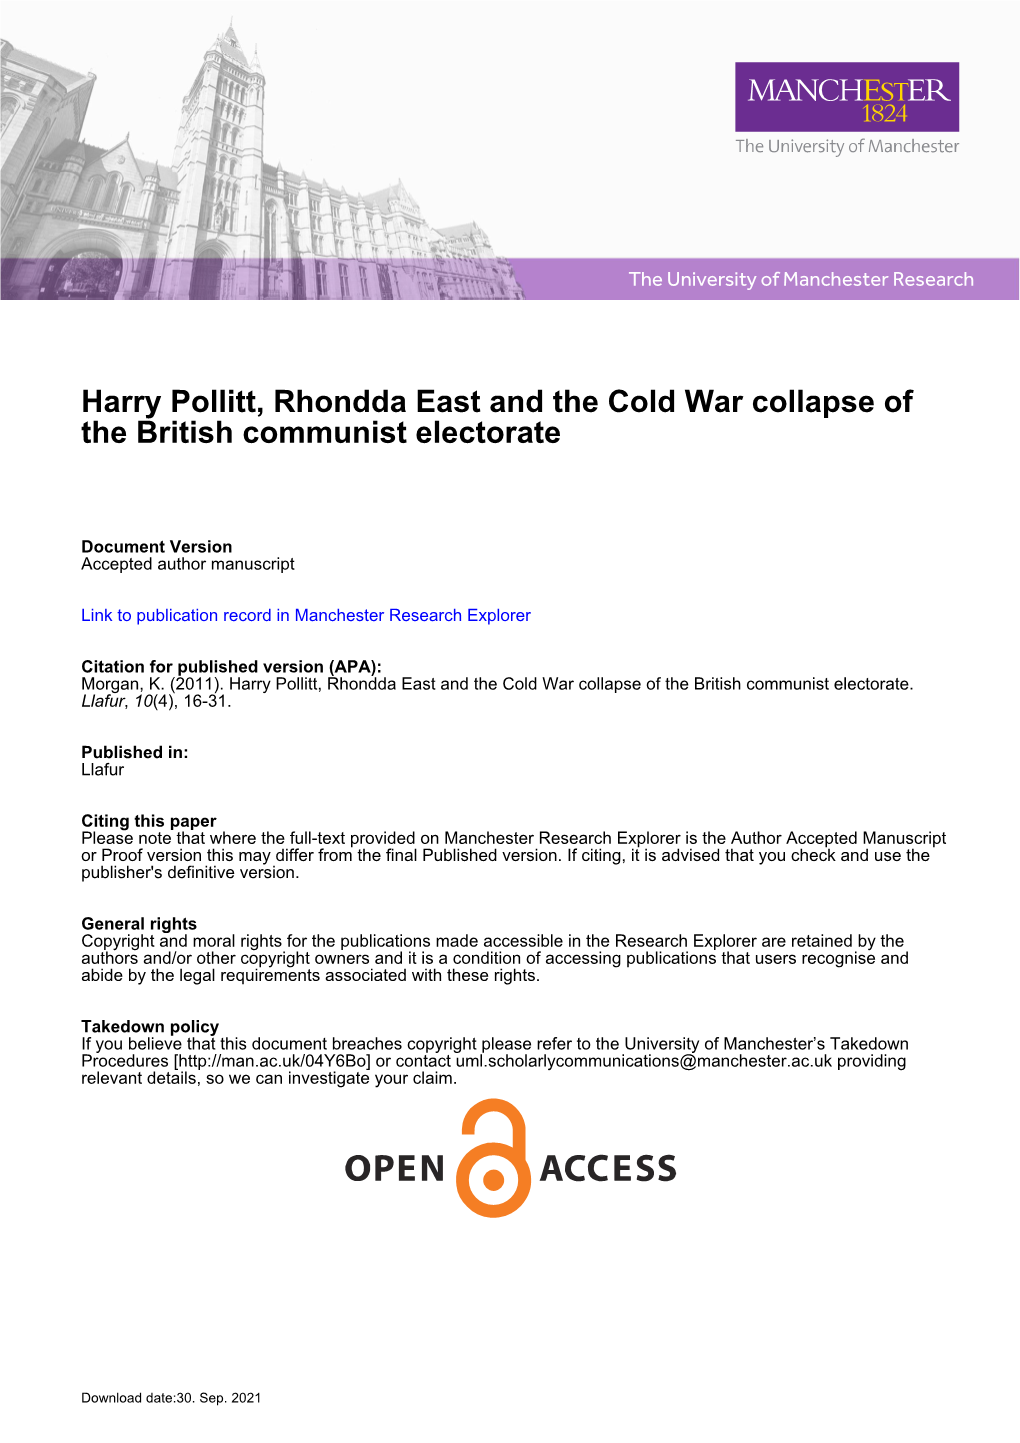 Harry Pollitt, Rhondda East and the Cold War Collapse of the British Communist Electorate